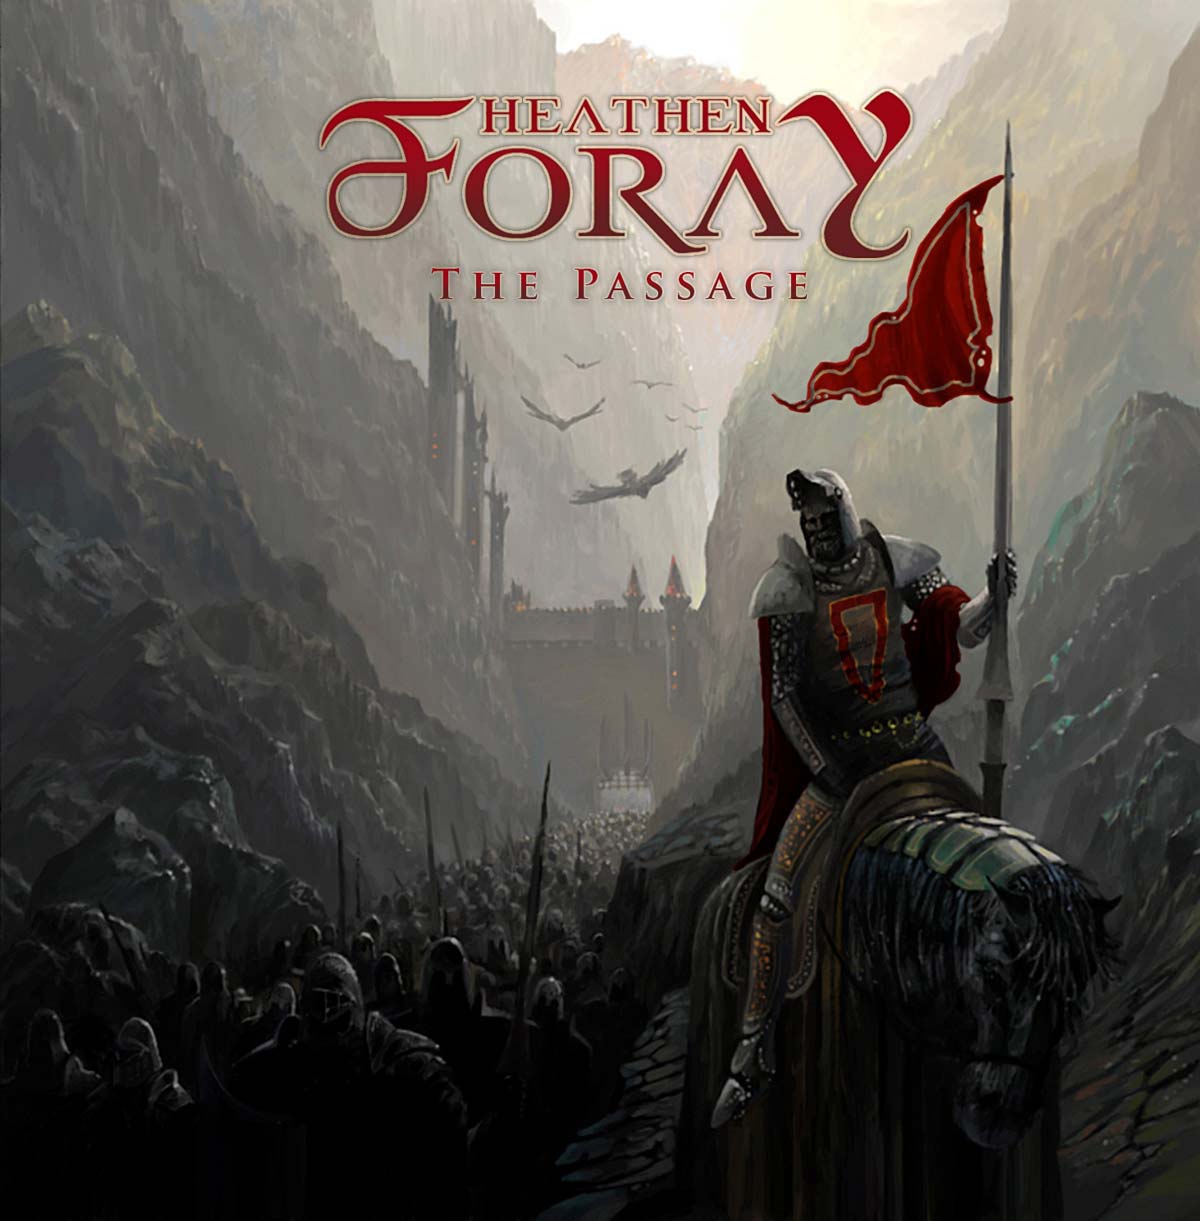 Cover of The Passage by Heathen Foray